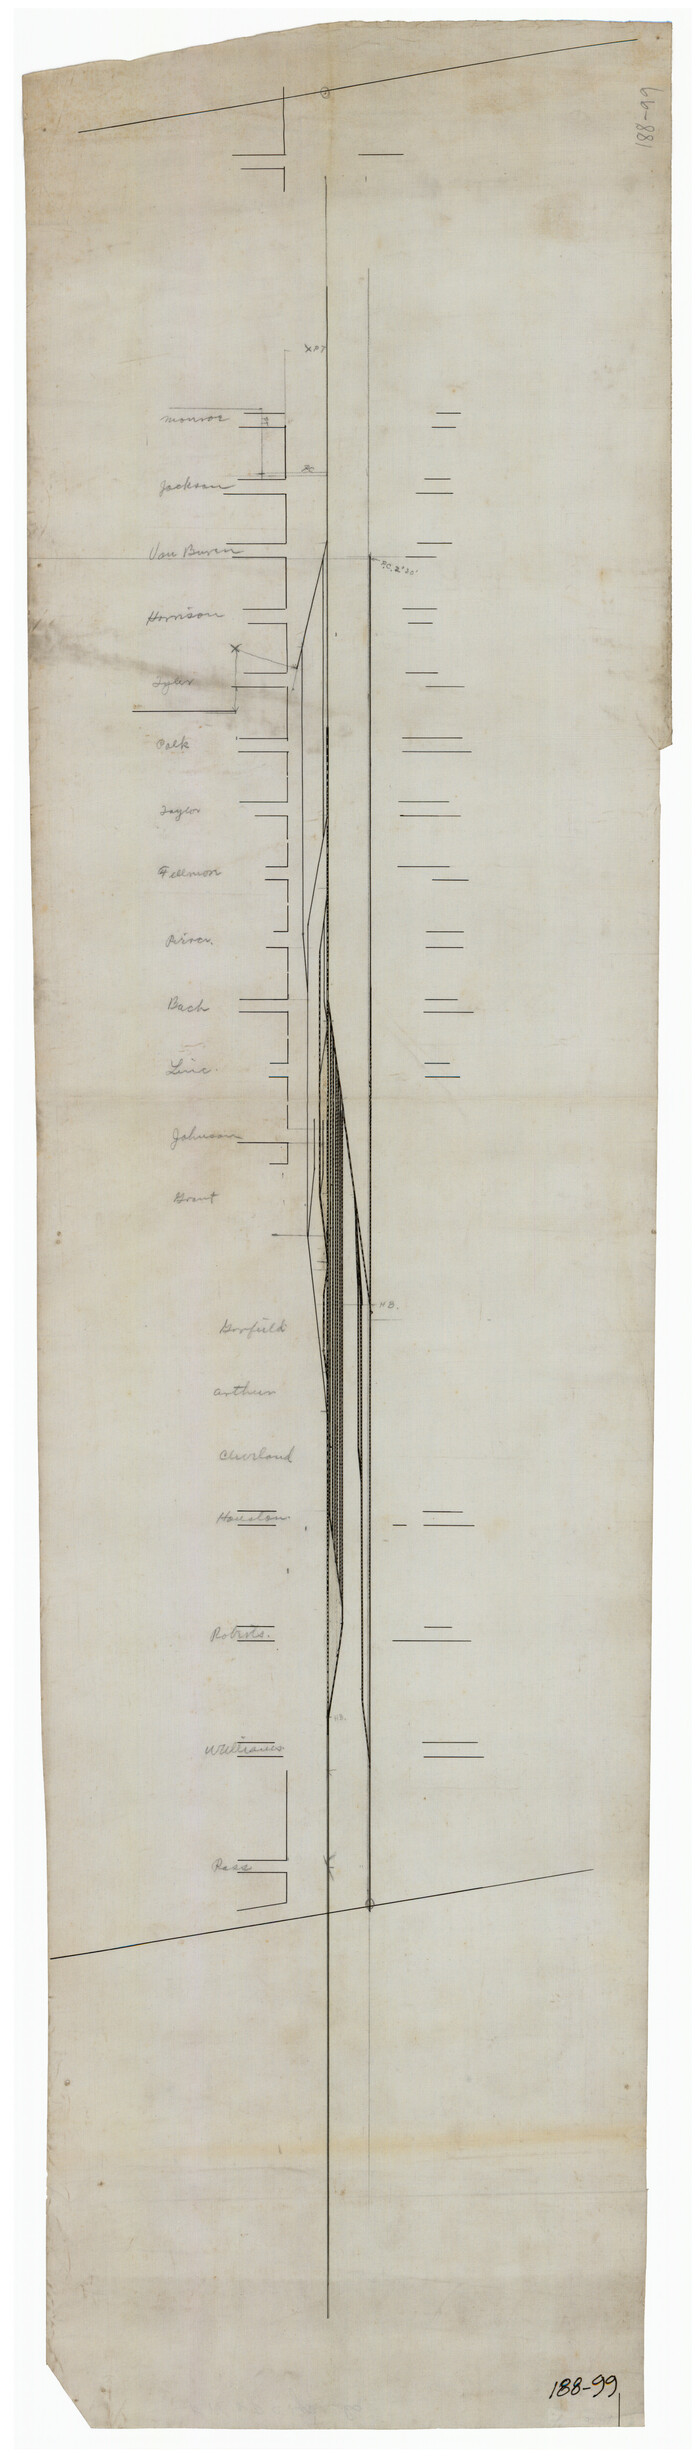 91830, [Sketch of Railroad Switchyard stretching from Ross to Monroe Streets, Amarillo, Texas], Twichell Survey Records